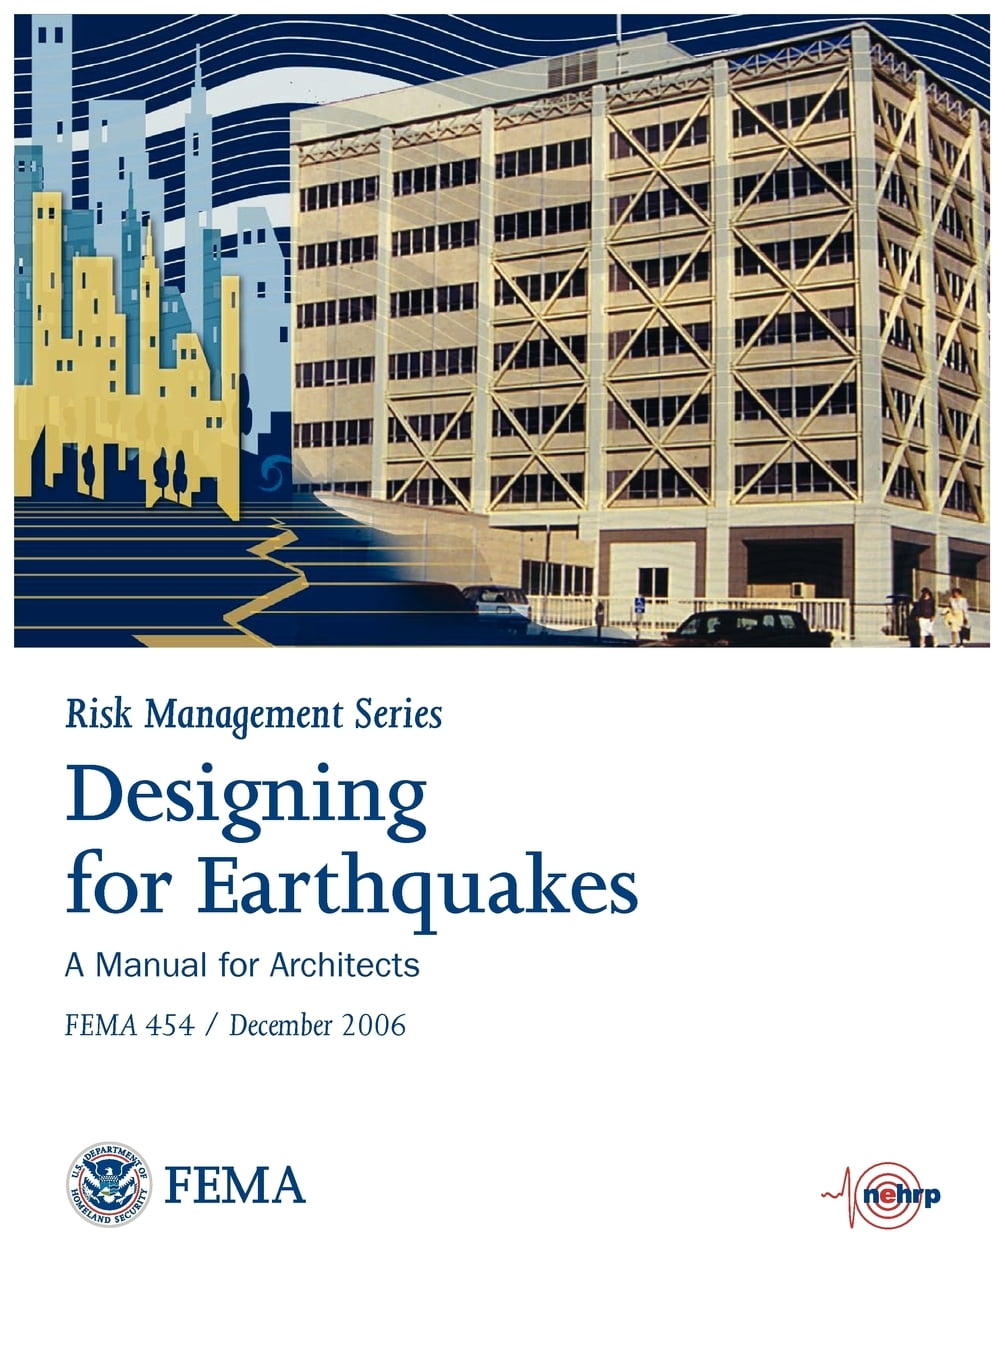 Designing for Earthquakes A Manual for Architects Fema 454 December
2006 Risk Management Series Epub-Ebook